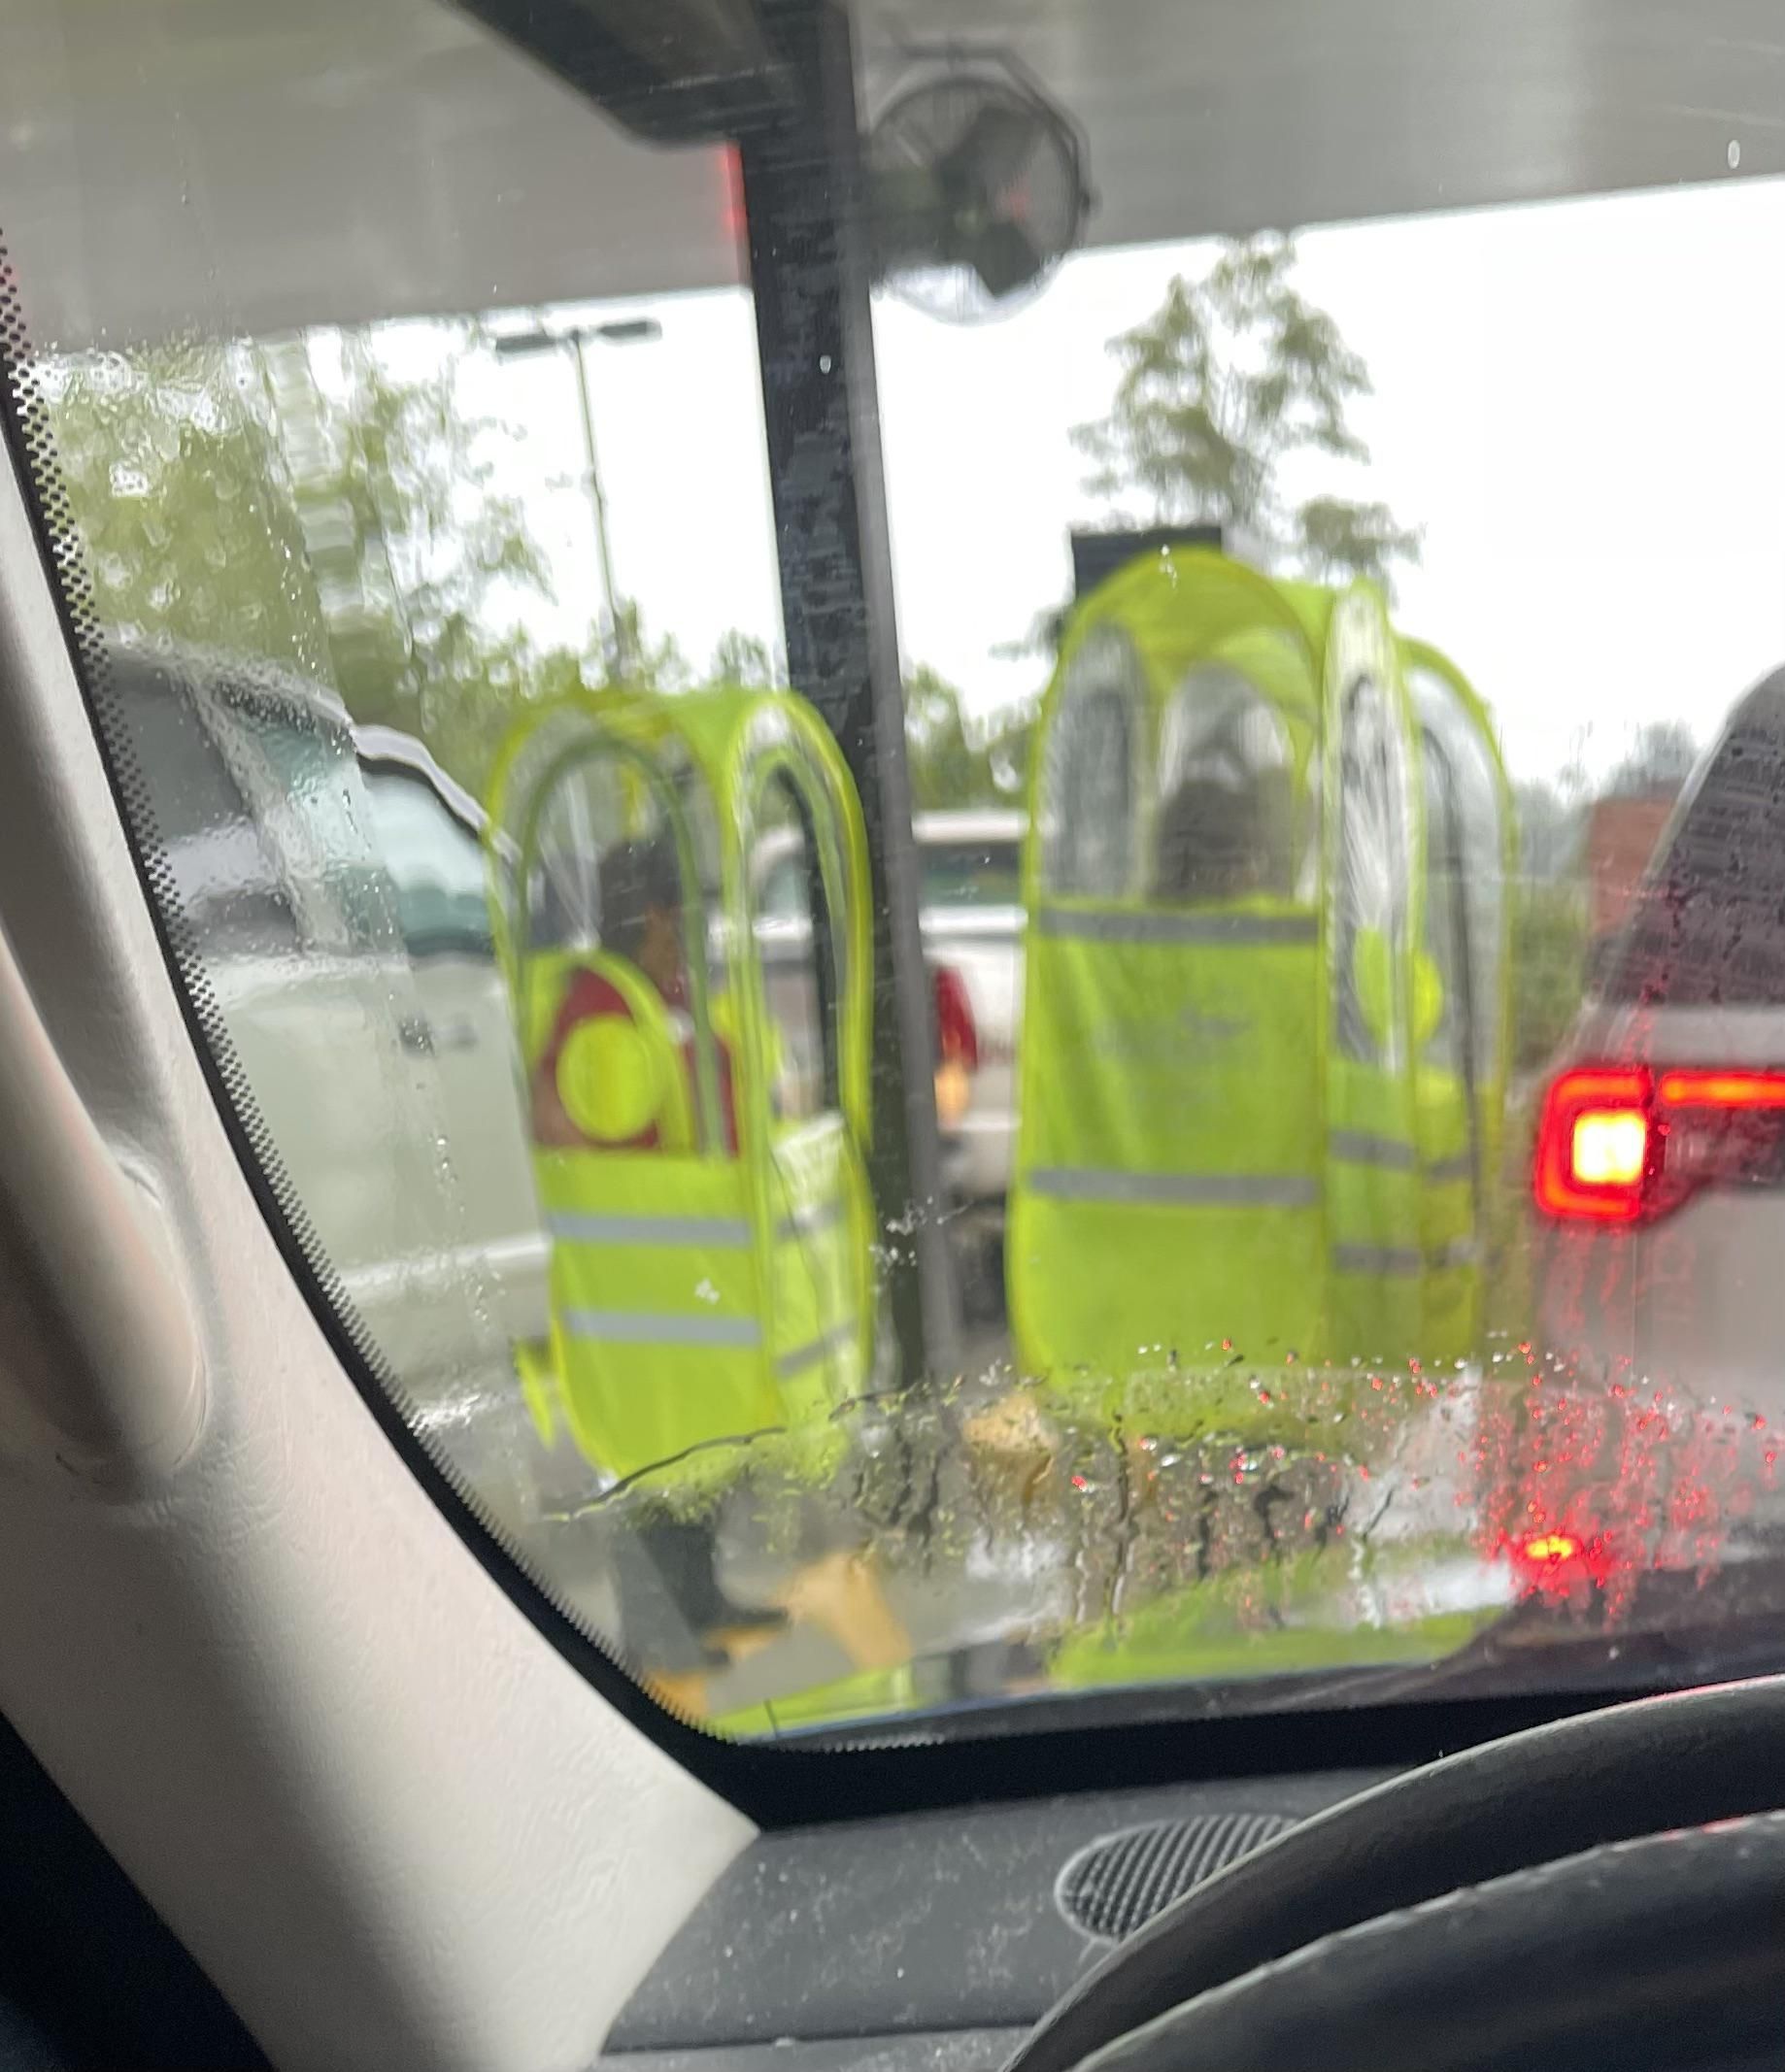 Chick fil a has damn minions out here taking orders